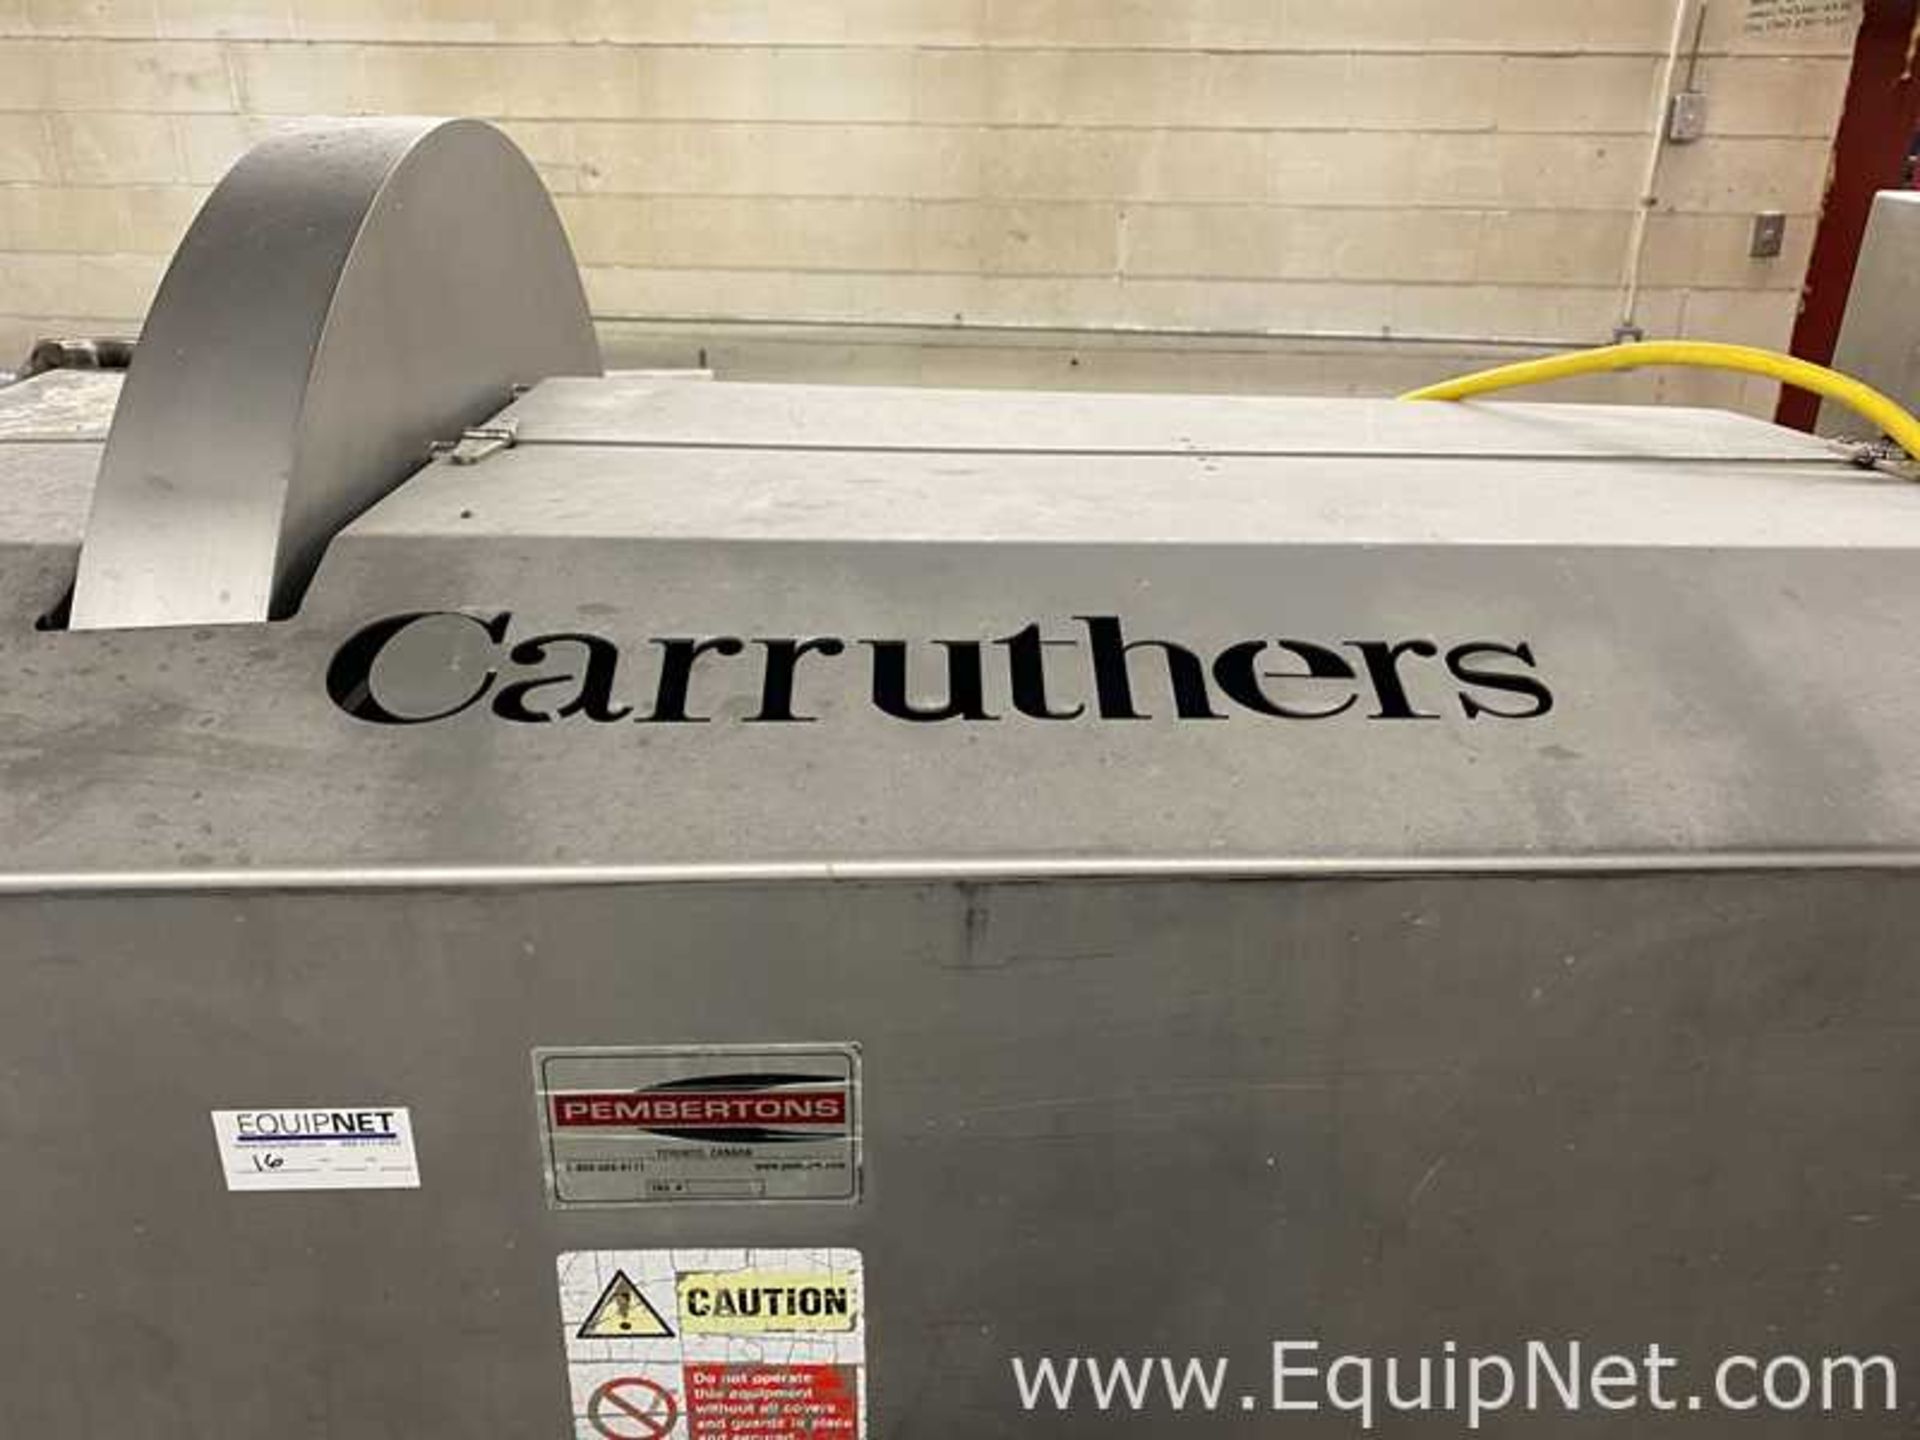 Carruthers AdvantEdge AE5000 Dicer With CV79000 Incline Conveyor Belt - Image 2 of 21